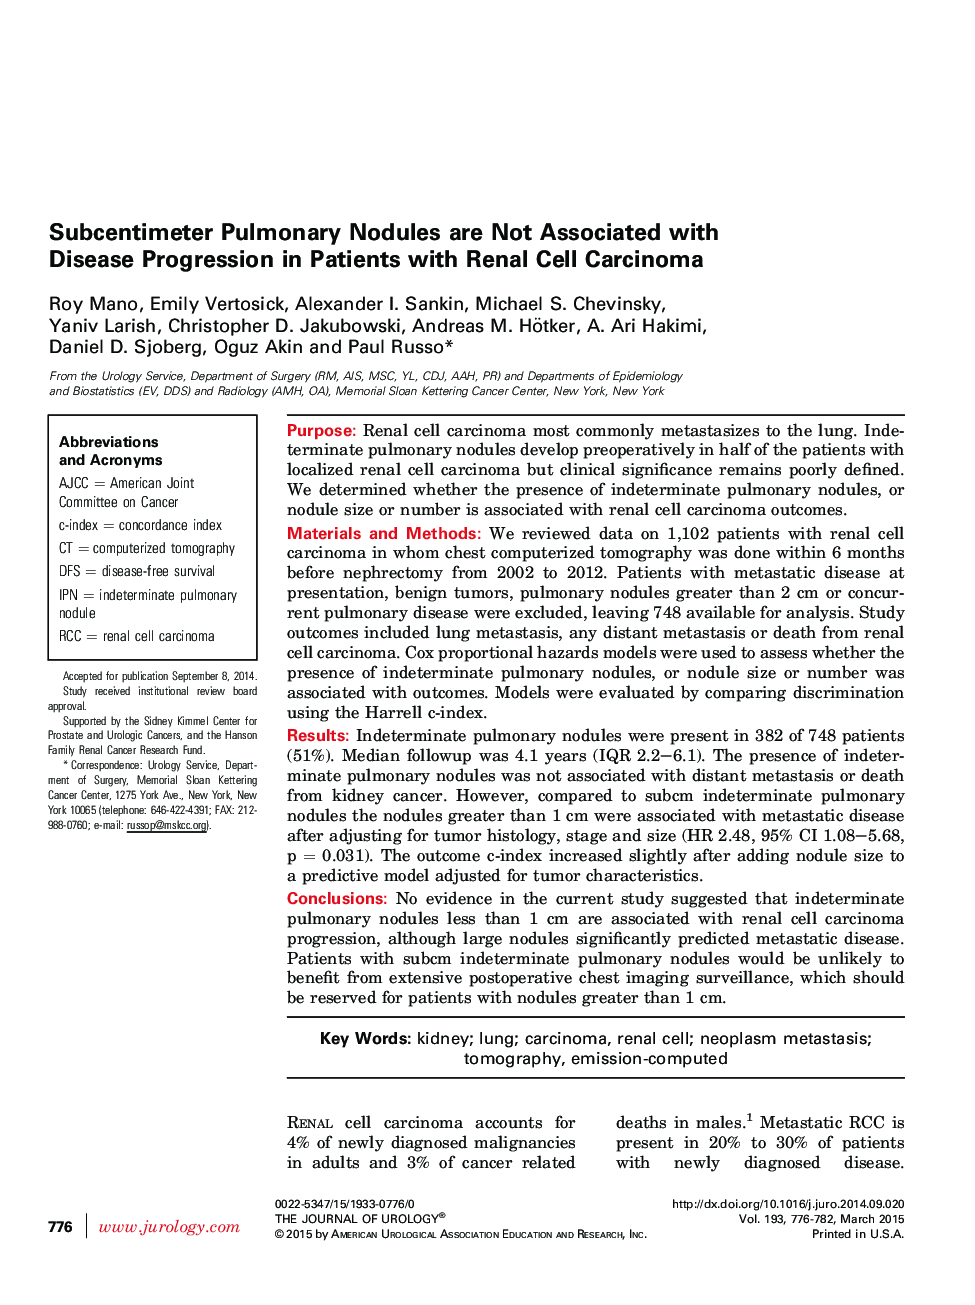 Subcentimeter Pulmonary Nodules are Not Associated with Disease Progression in Patients with Renal Cell Carcinoma 